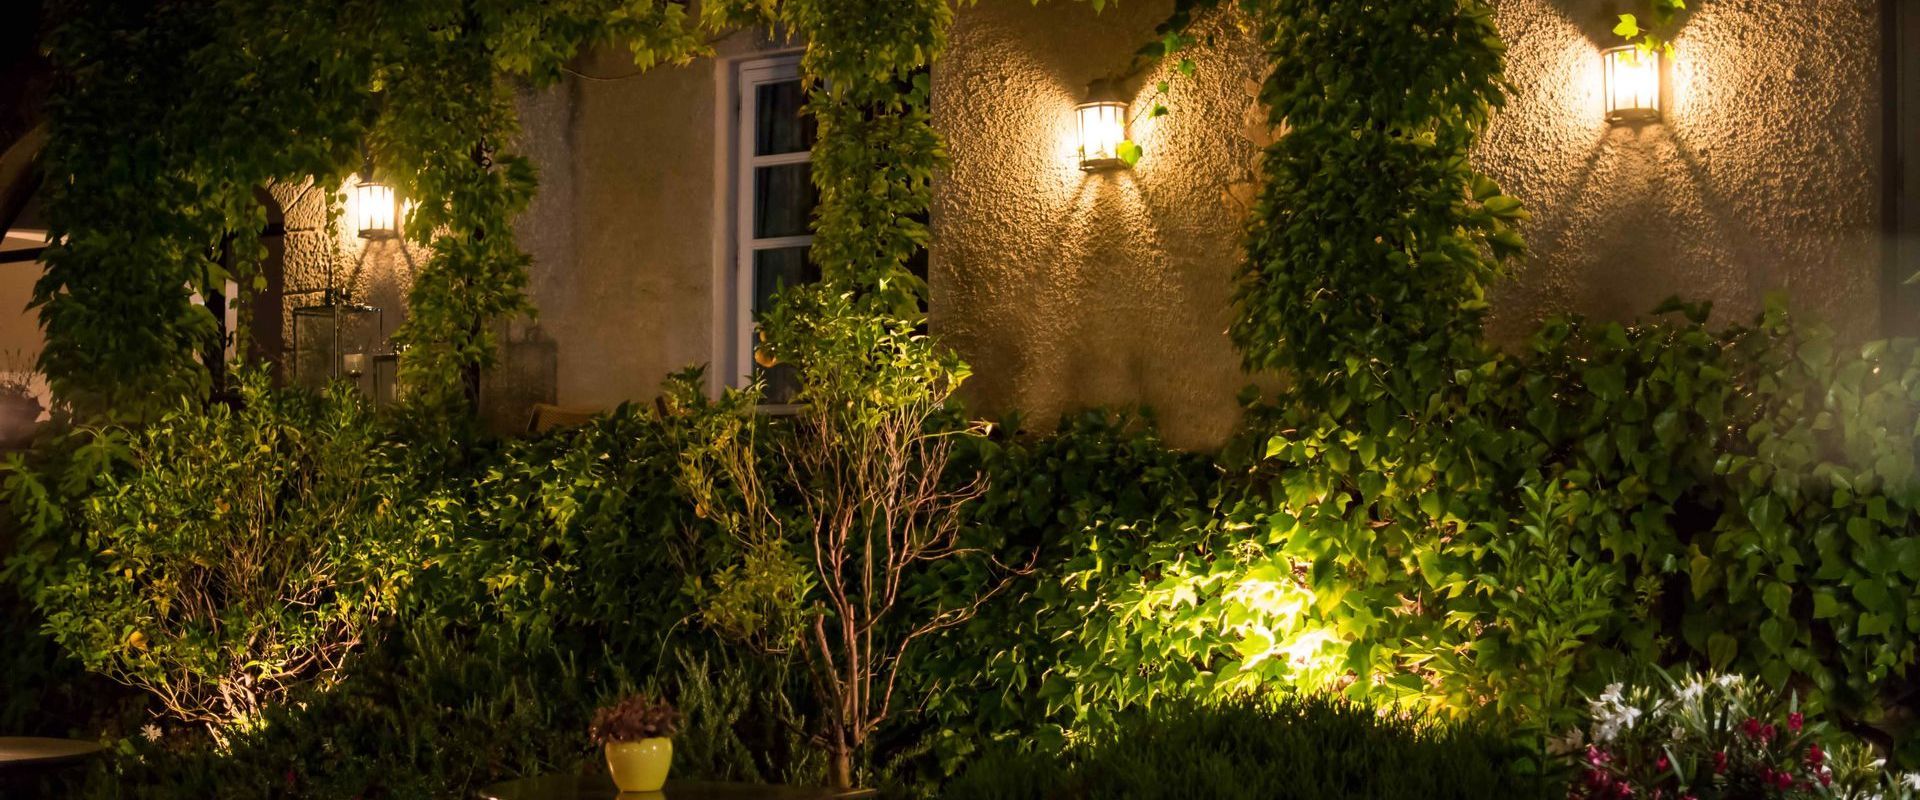 Downlighting On Building Wall With Vines On Wall